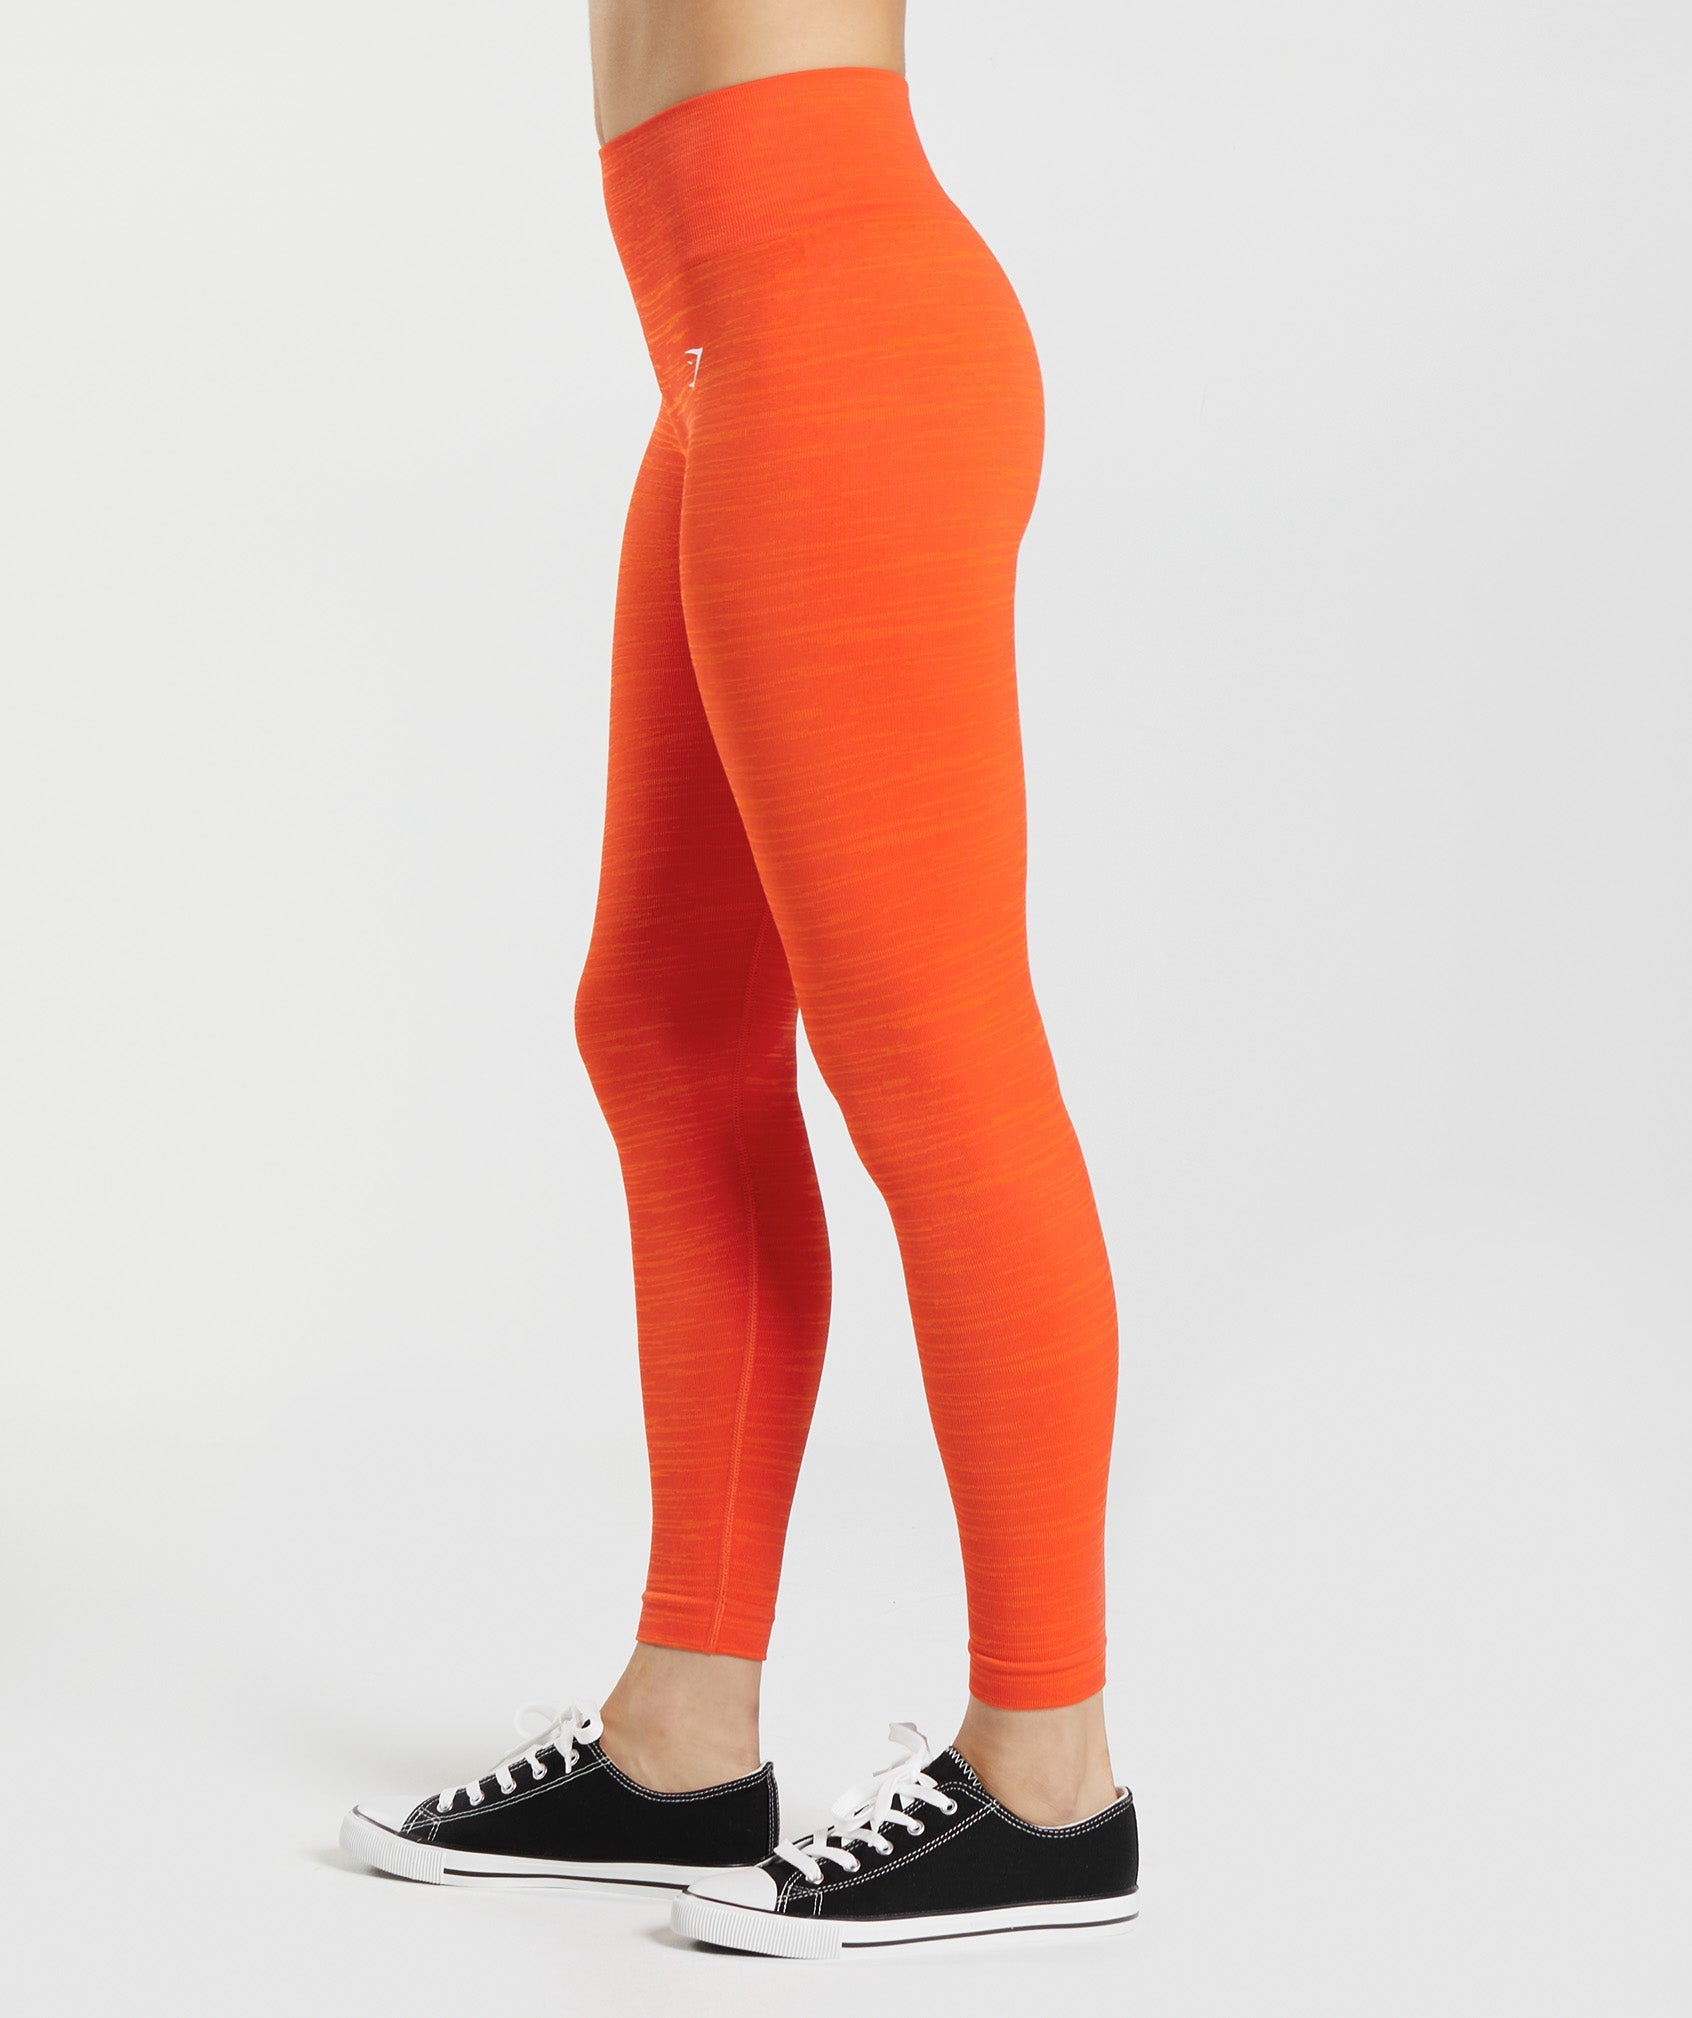 Gymshark Flawless Knit Leggings And Crop Top Orange - $60 - From Sydney